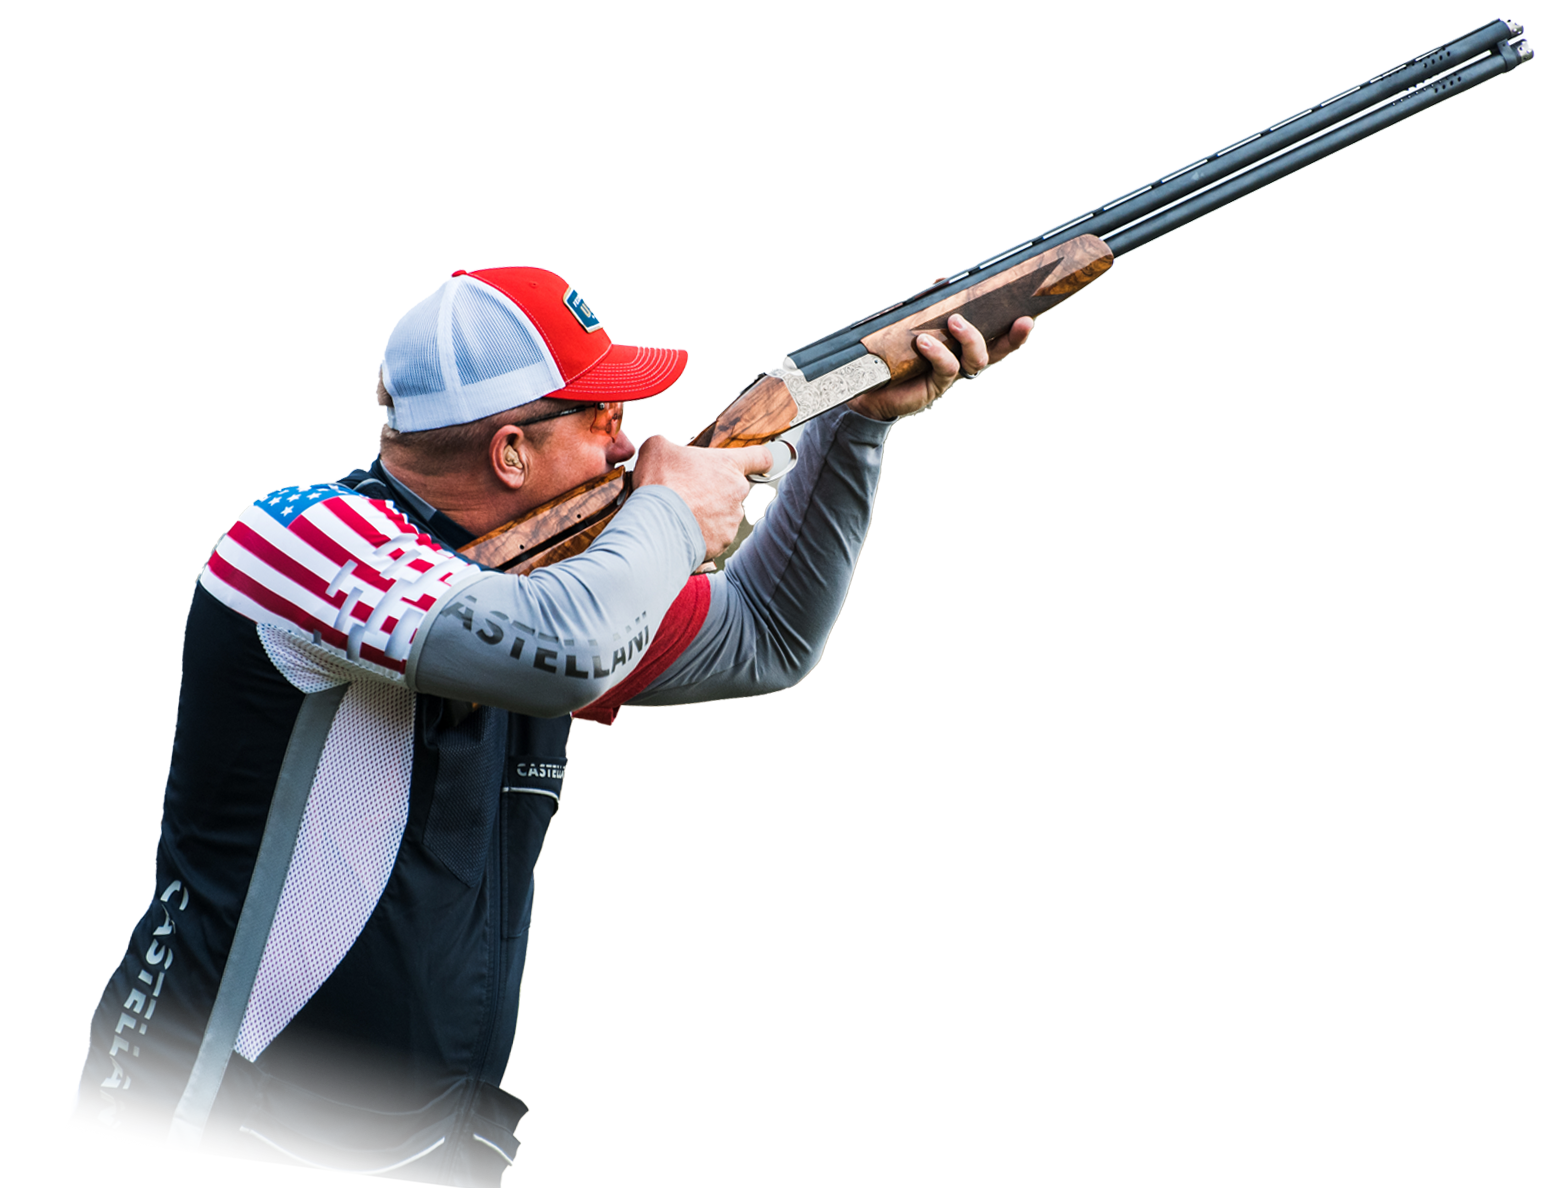 Man shoots long gun wearing competition shirt with American flag on sleeve